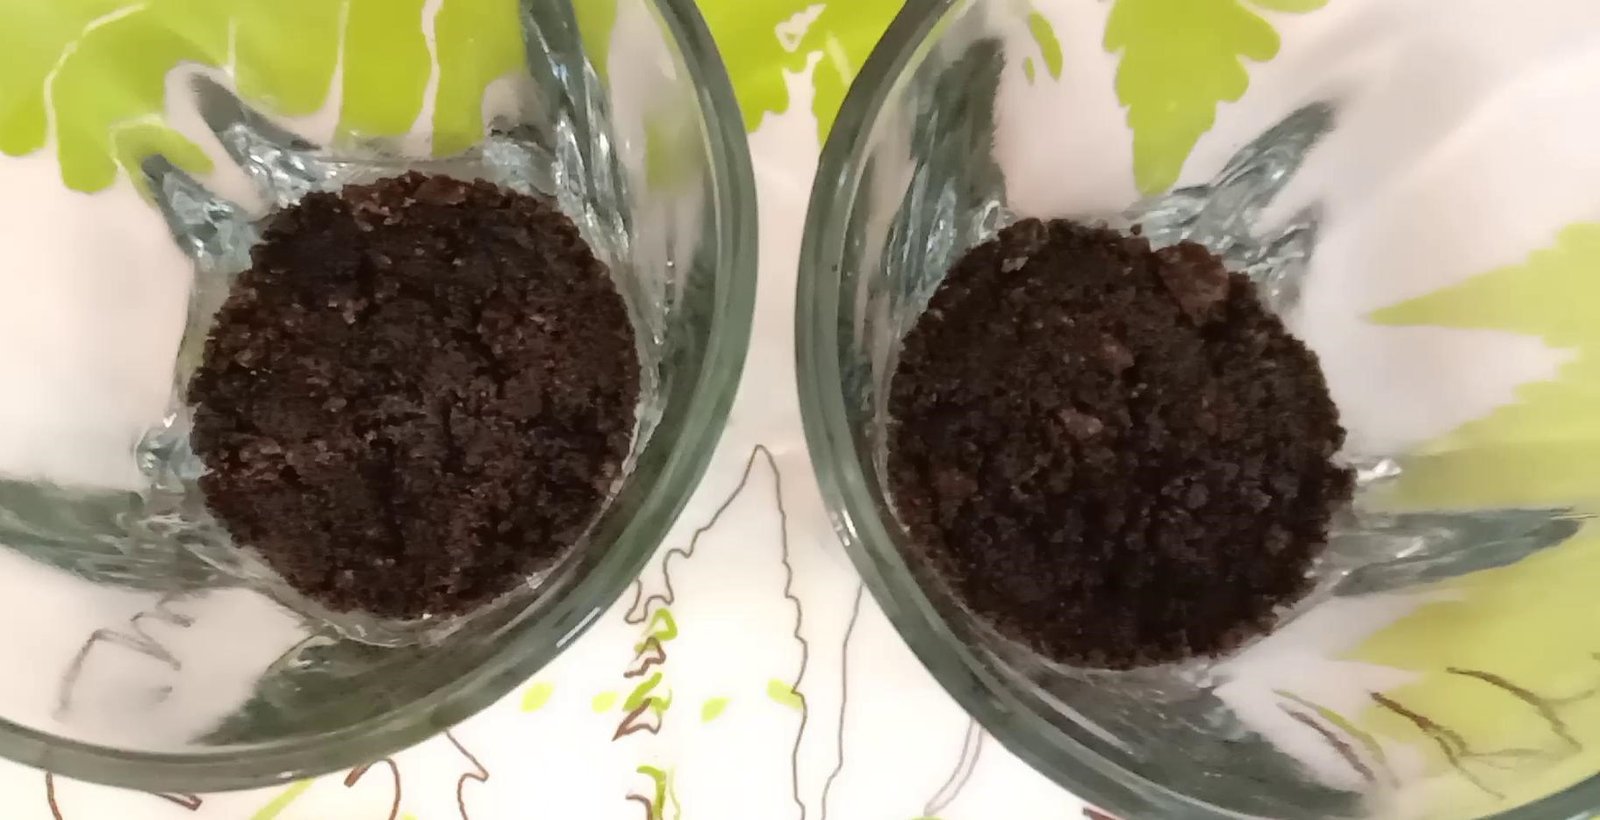 Adding powdered Oreo biscuits mixture at the bottom of both the serving glasses, Oreo pudding.